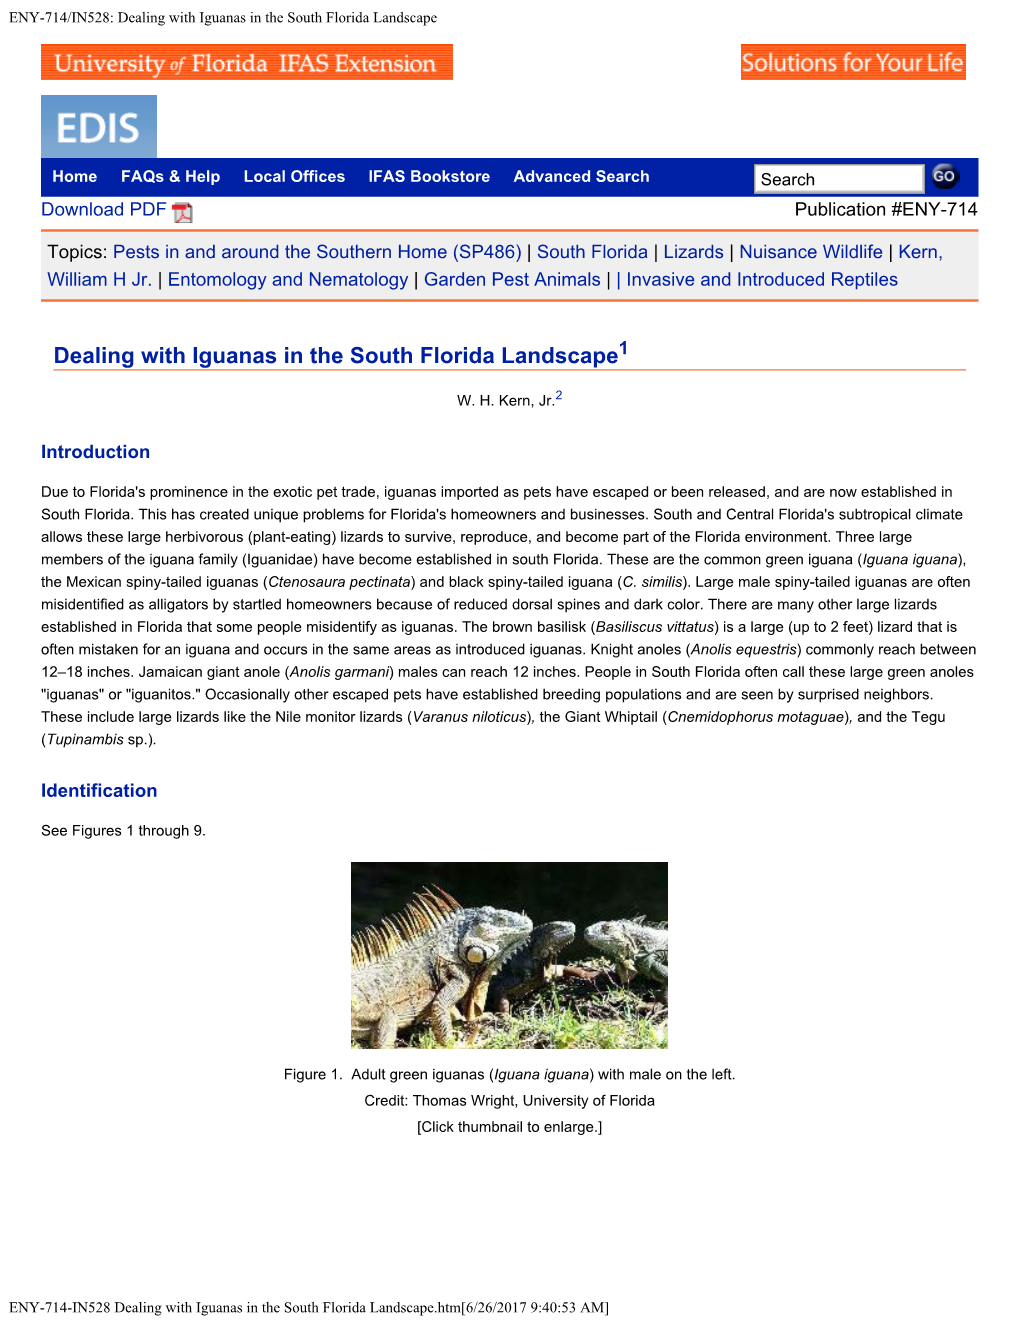 Dealing with Iguanas in the South Florida Landscape